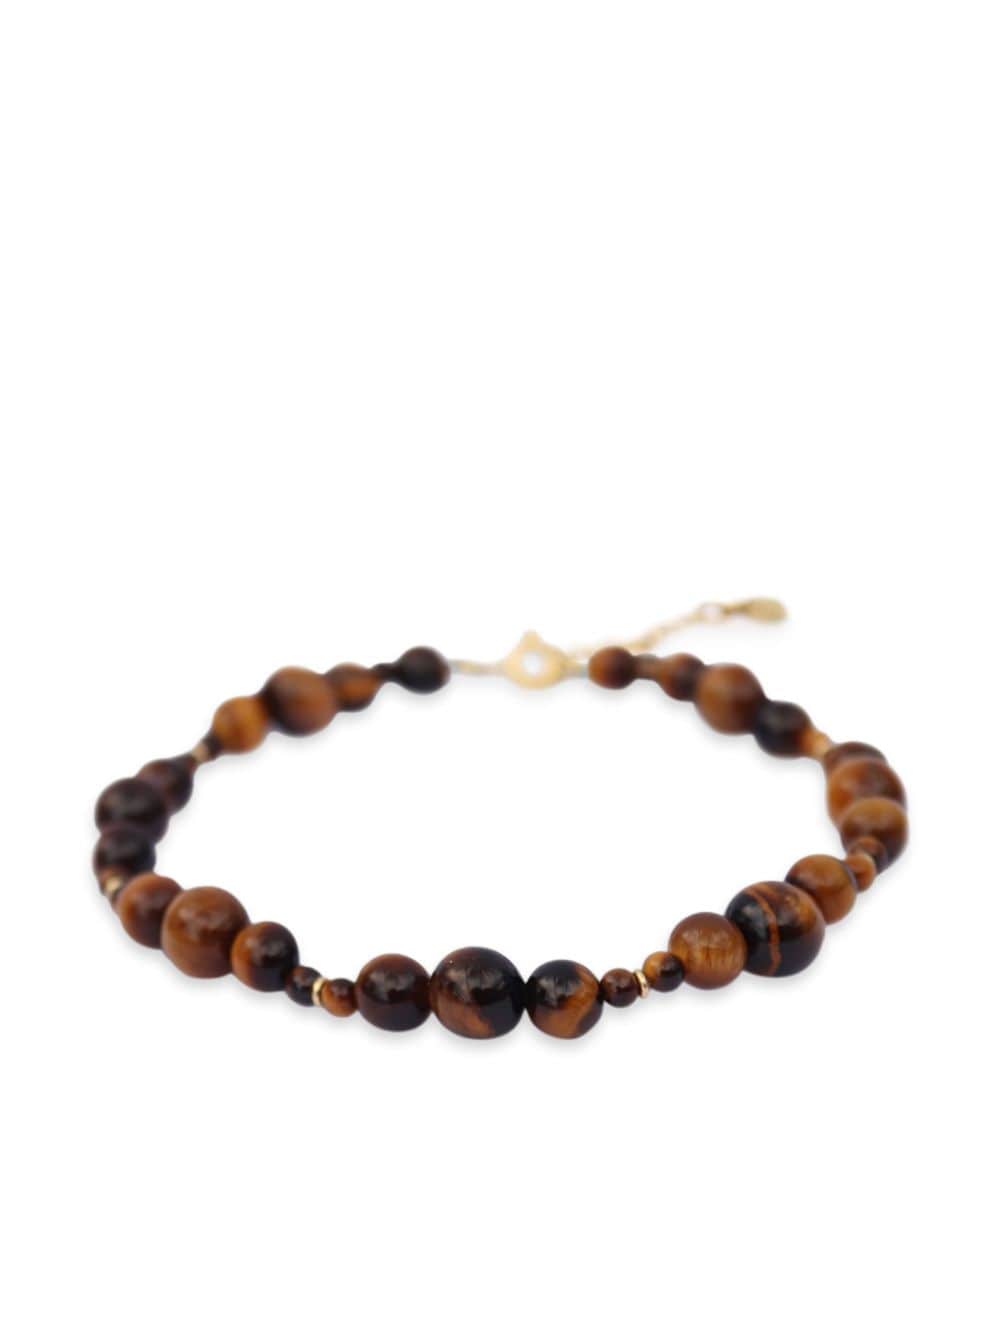 THE ALKEMISTRY 18KT YELLOW GOLD BOBA BROWN SUGAR TIGER EYE BEADED ANKLET